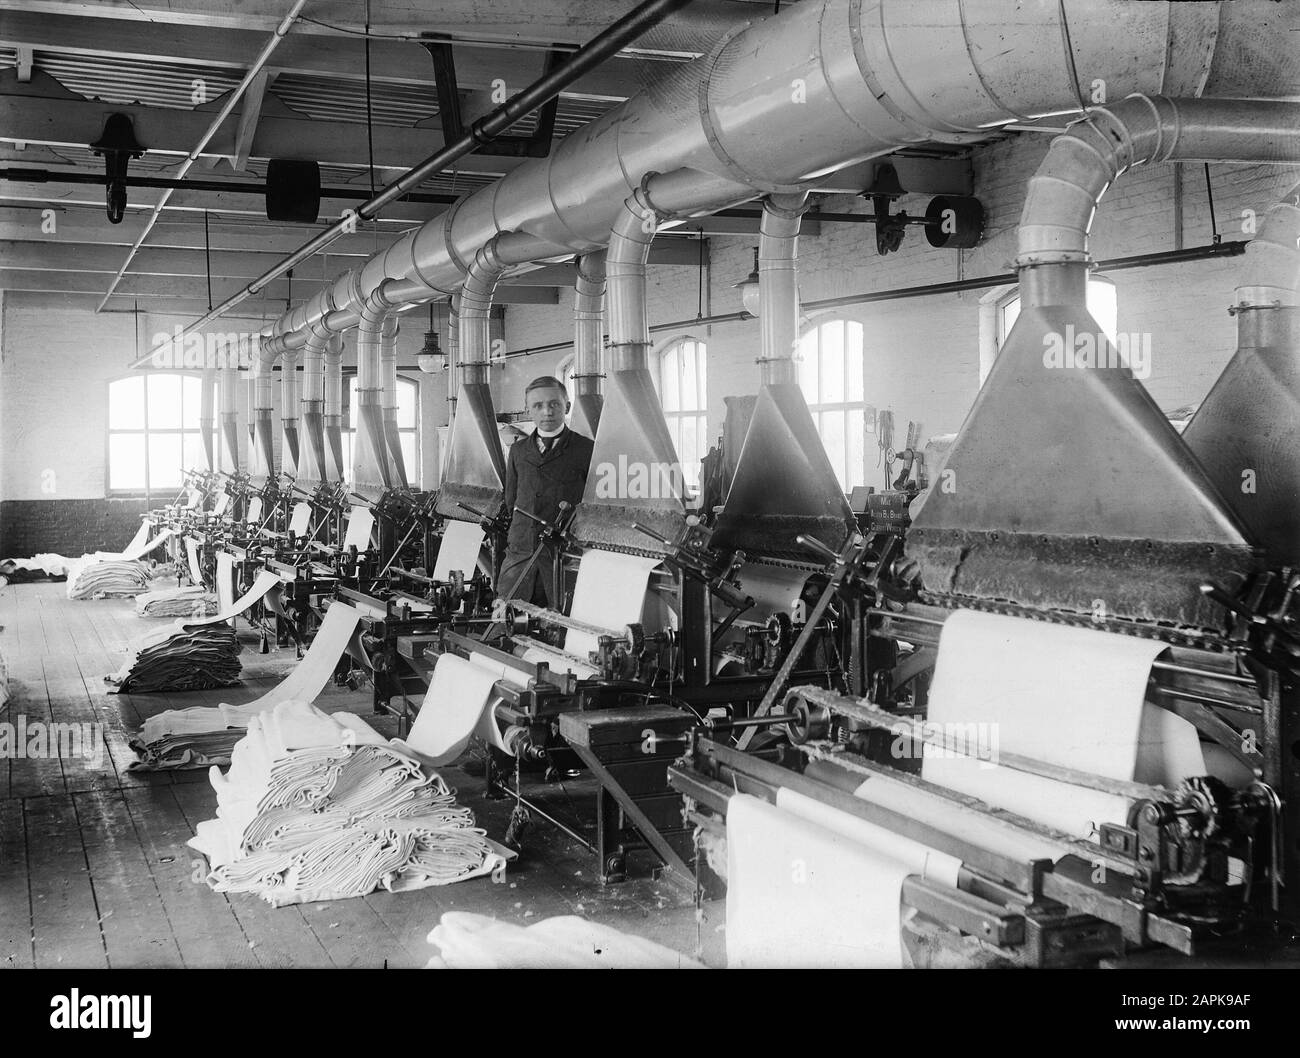 13x18 Dust extraction system in a textile factory Date: undated ...